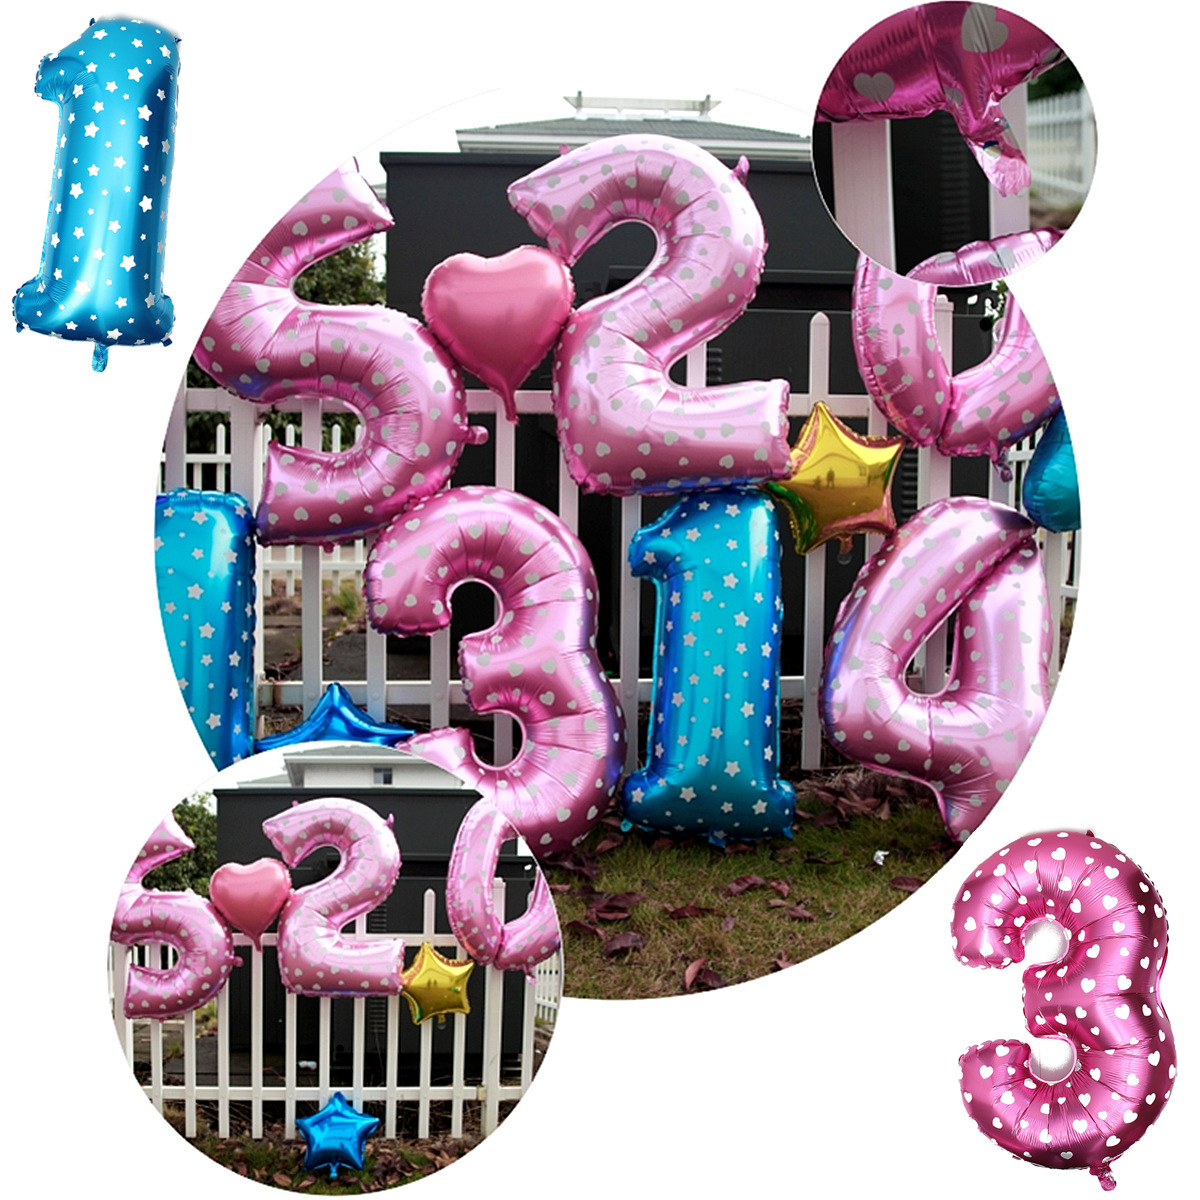 40-Inch-Aluminum-Foil-Number-Balloon-Heart-Shape-Pattern-Wedding-Valentine-Party-Decoration-1021384-1